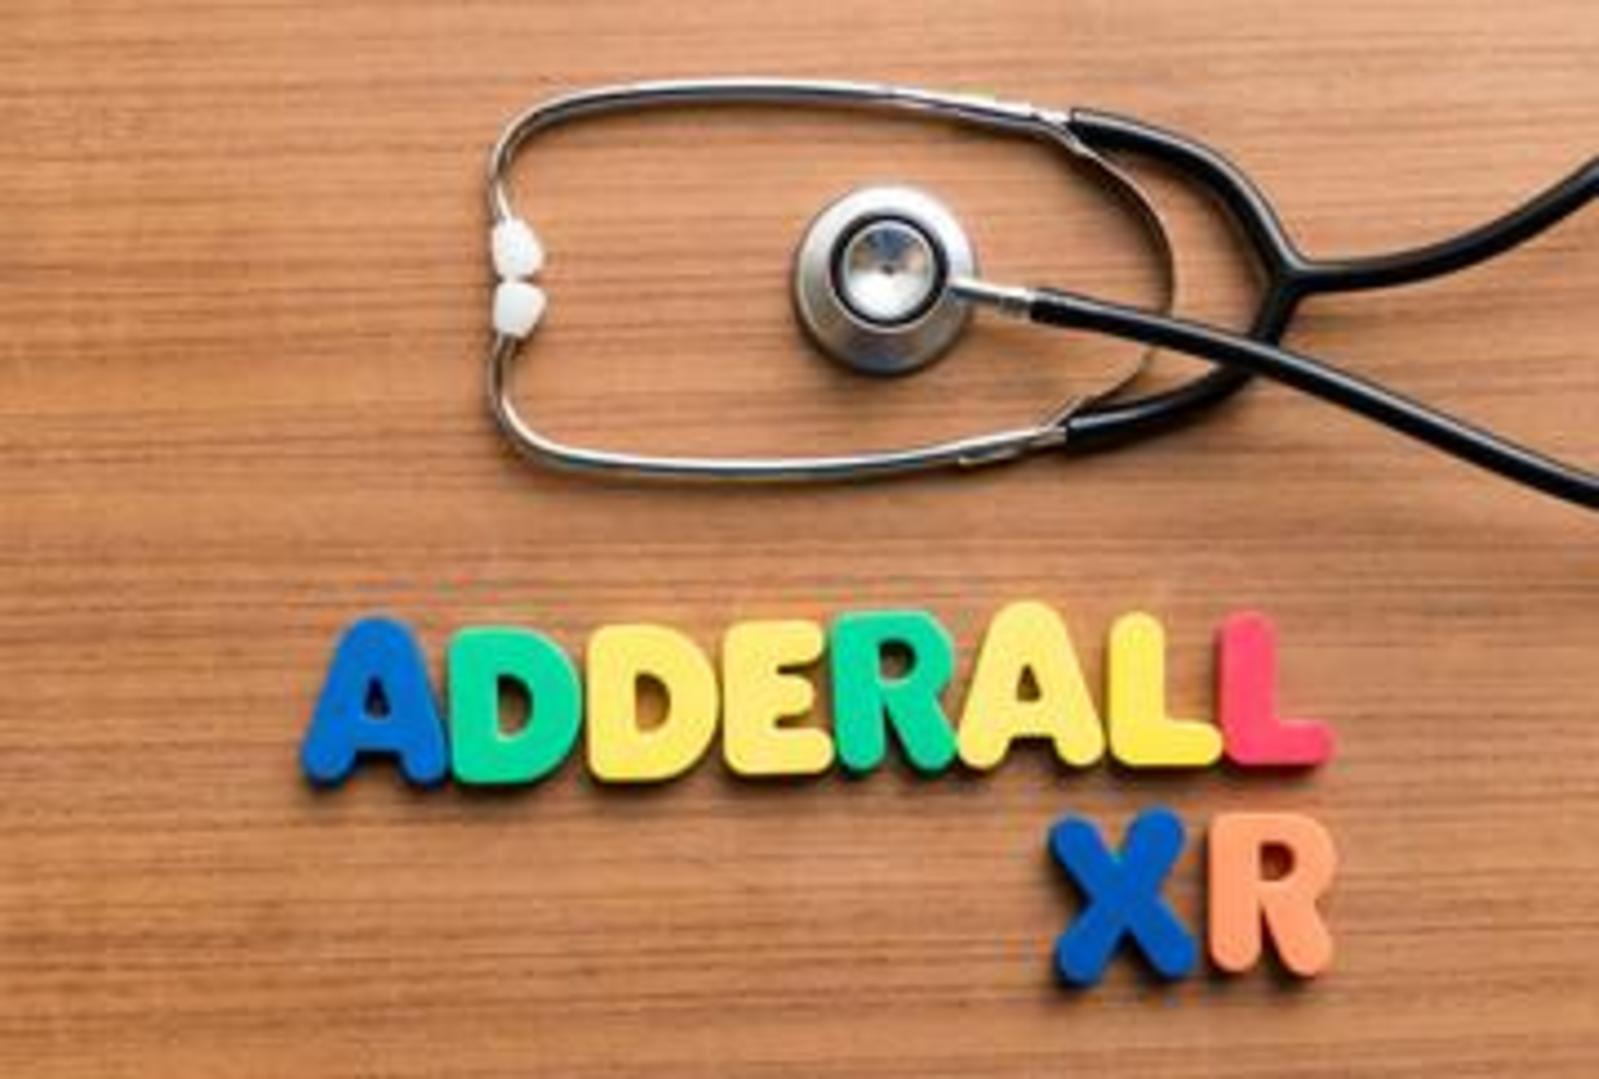 Where can I buy Adderall 20 mg online? In a legal way for ADHD treatment | WorkNOLA